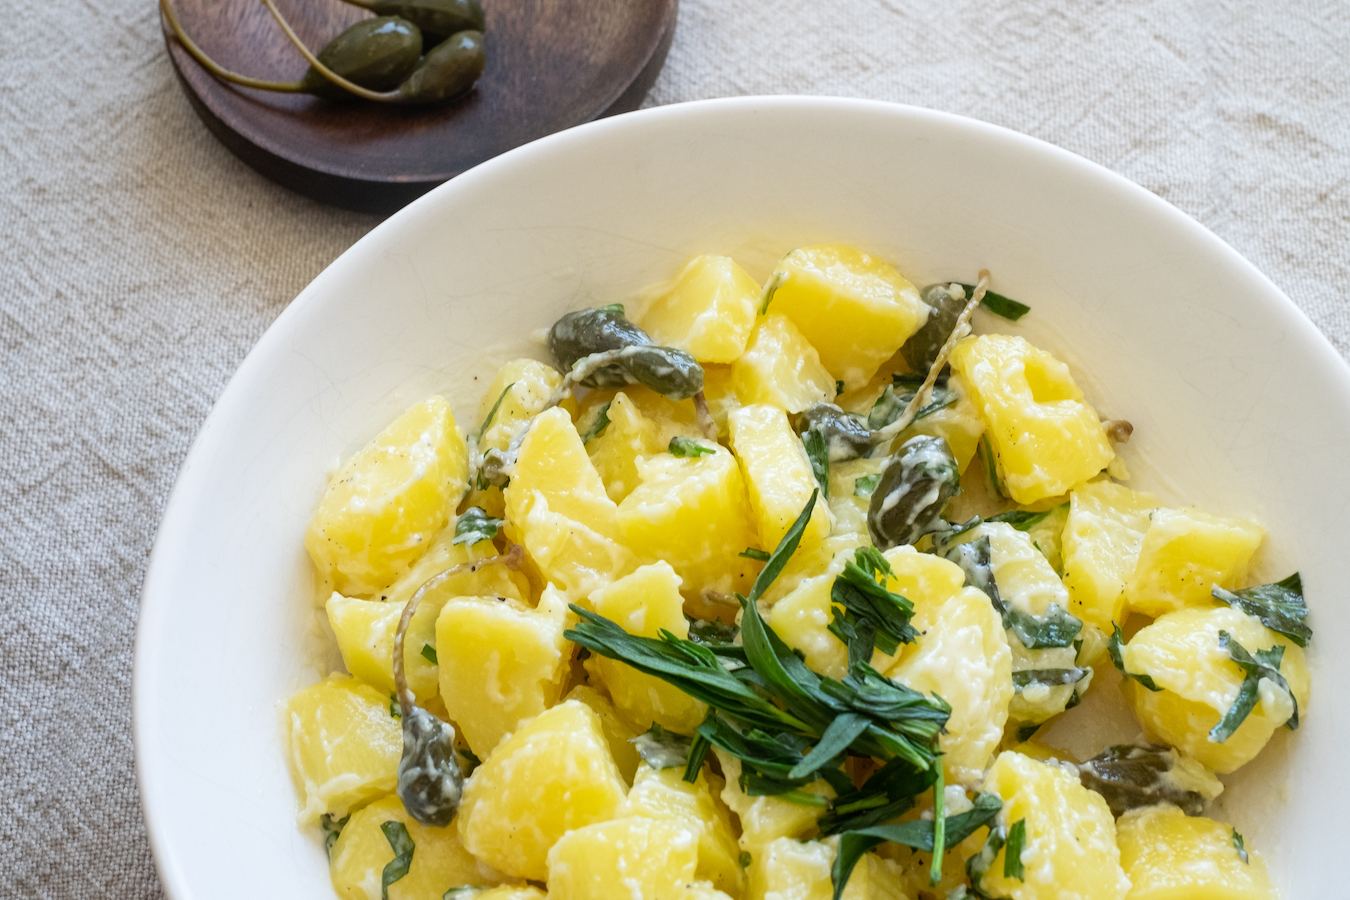 Creamy Potato salad with tarragon and caper berries original with capers IG